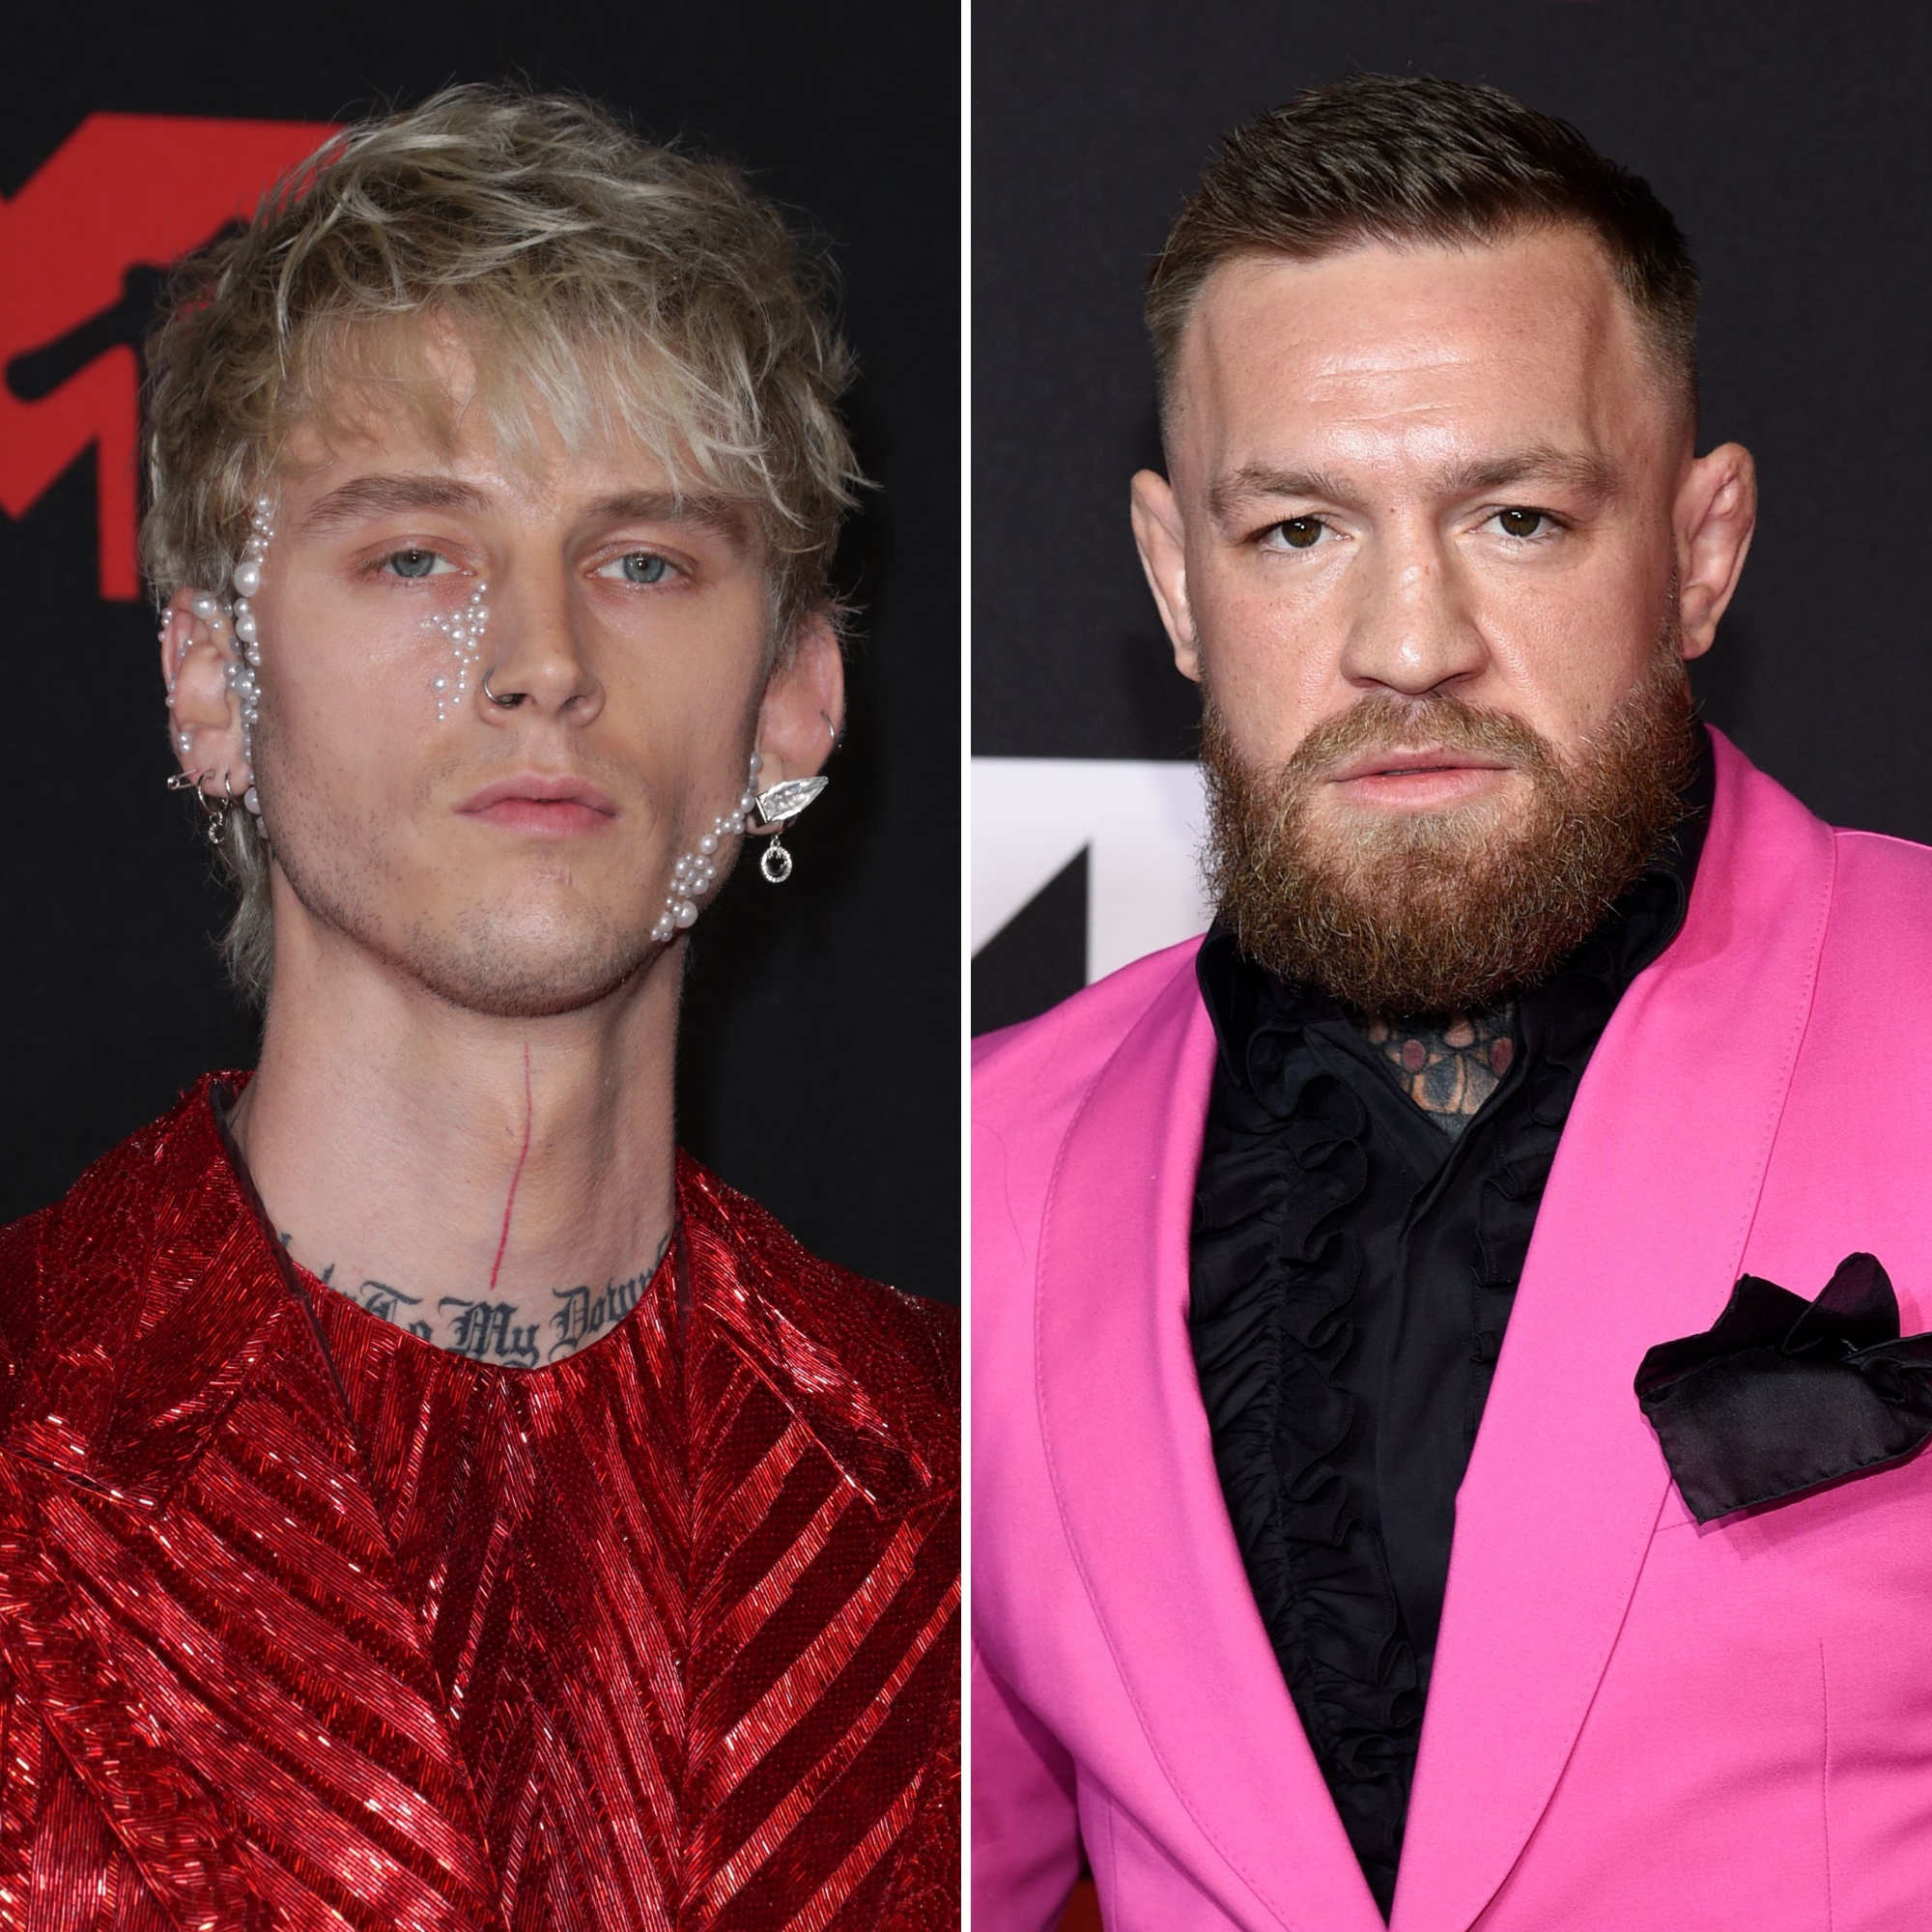 Mgk and conor mcgregor